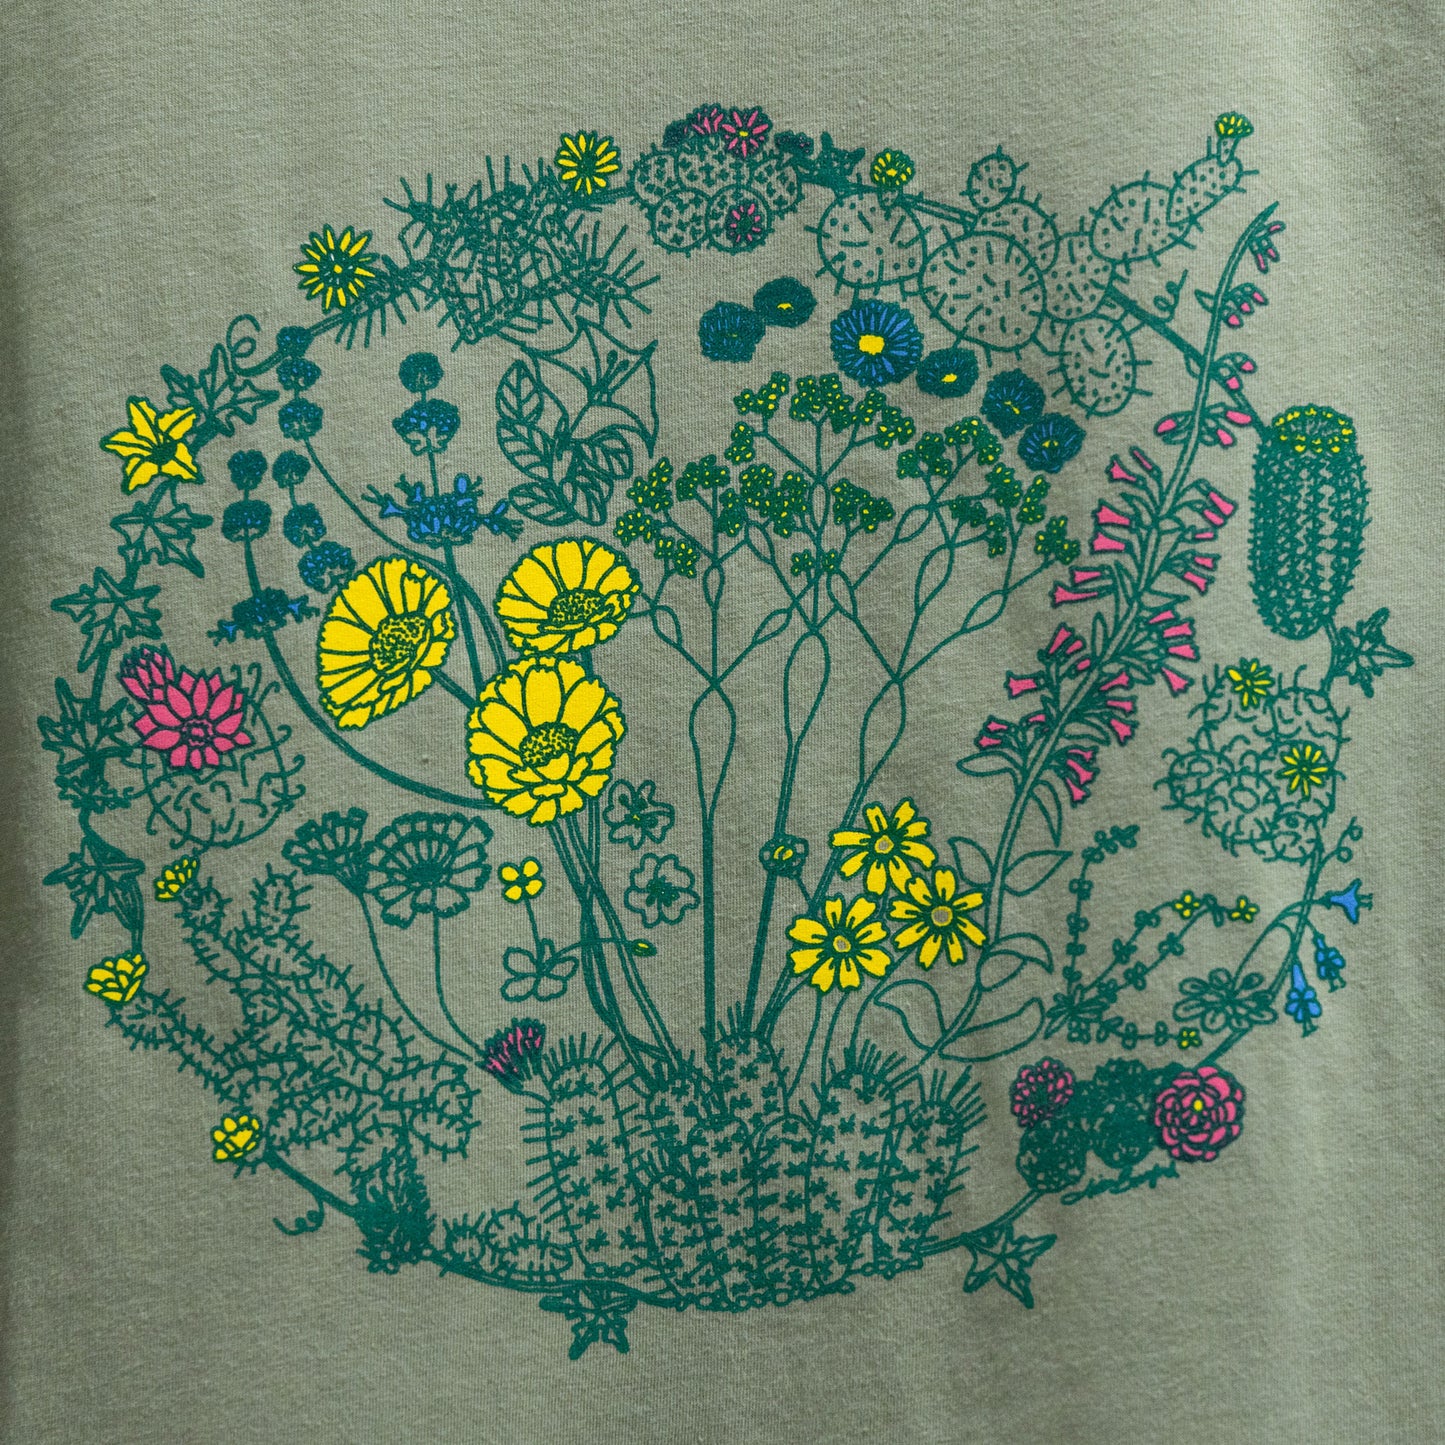 A close-up of a sage color t-shirt with an illustration of flowers on plants that can be found in the Mojave Desert and/or Joshua Tree National Park. The outlines of the plants are a dark green color. Some of the flowers are colored a bright yellow, some a bright pink, and some a bright blue. The composition is in a circular shape.